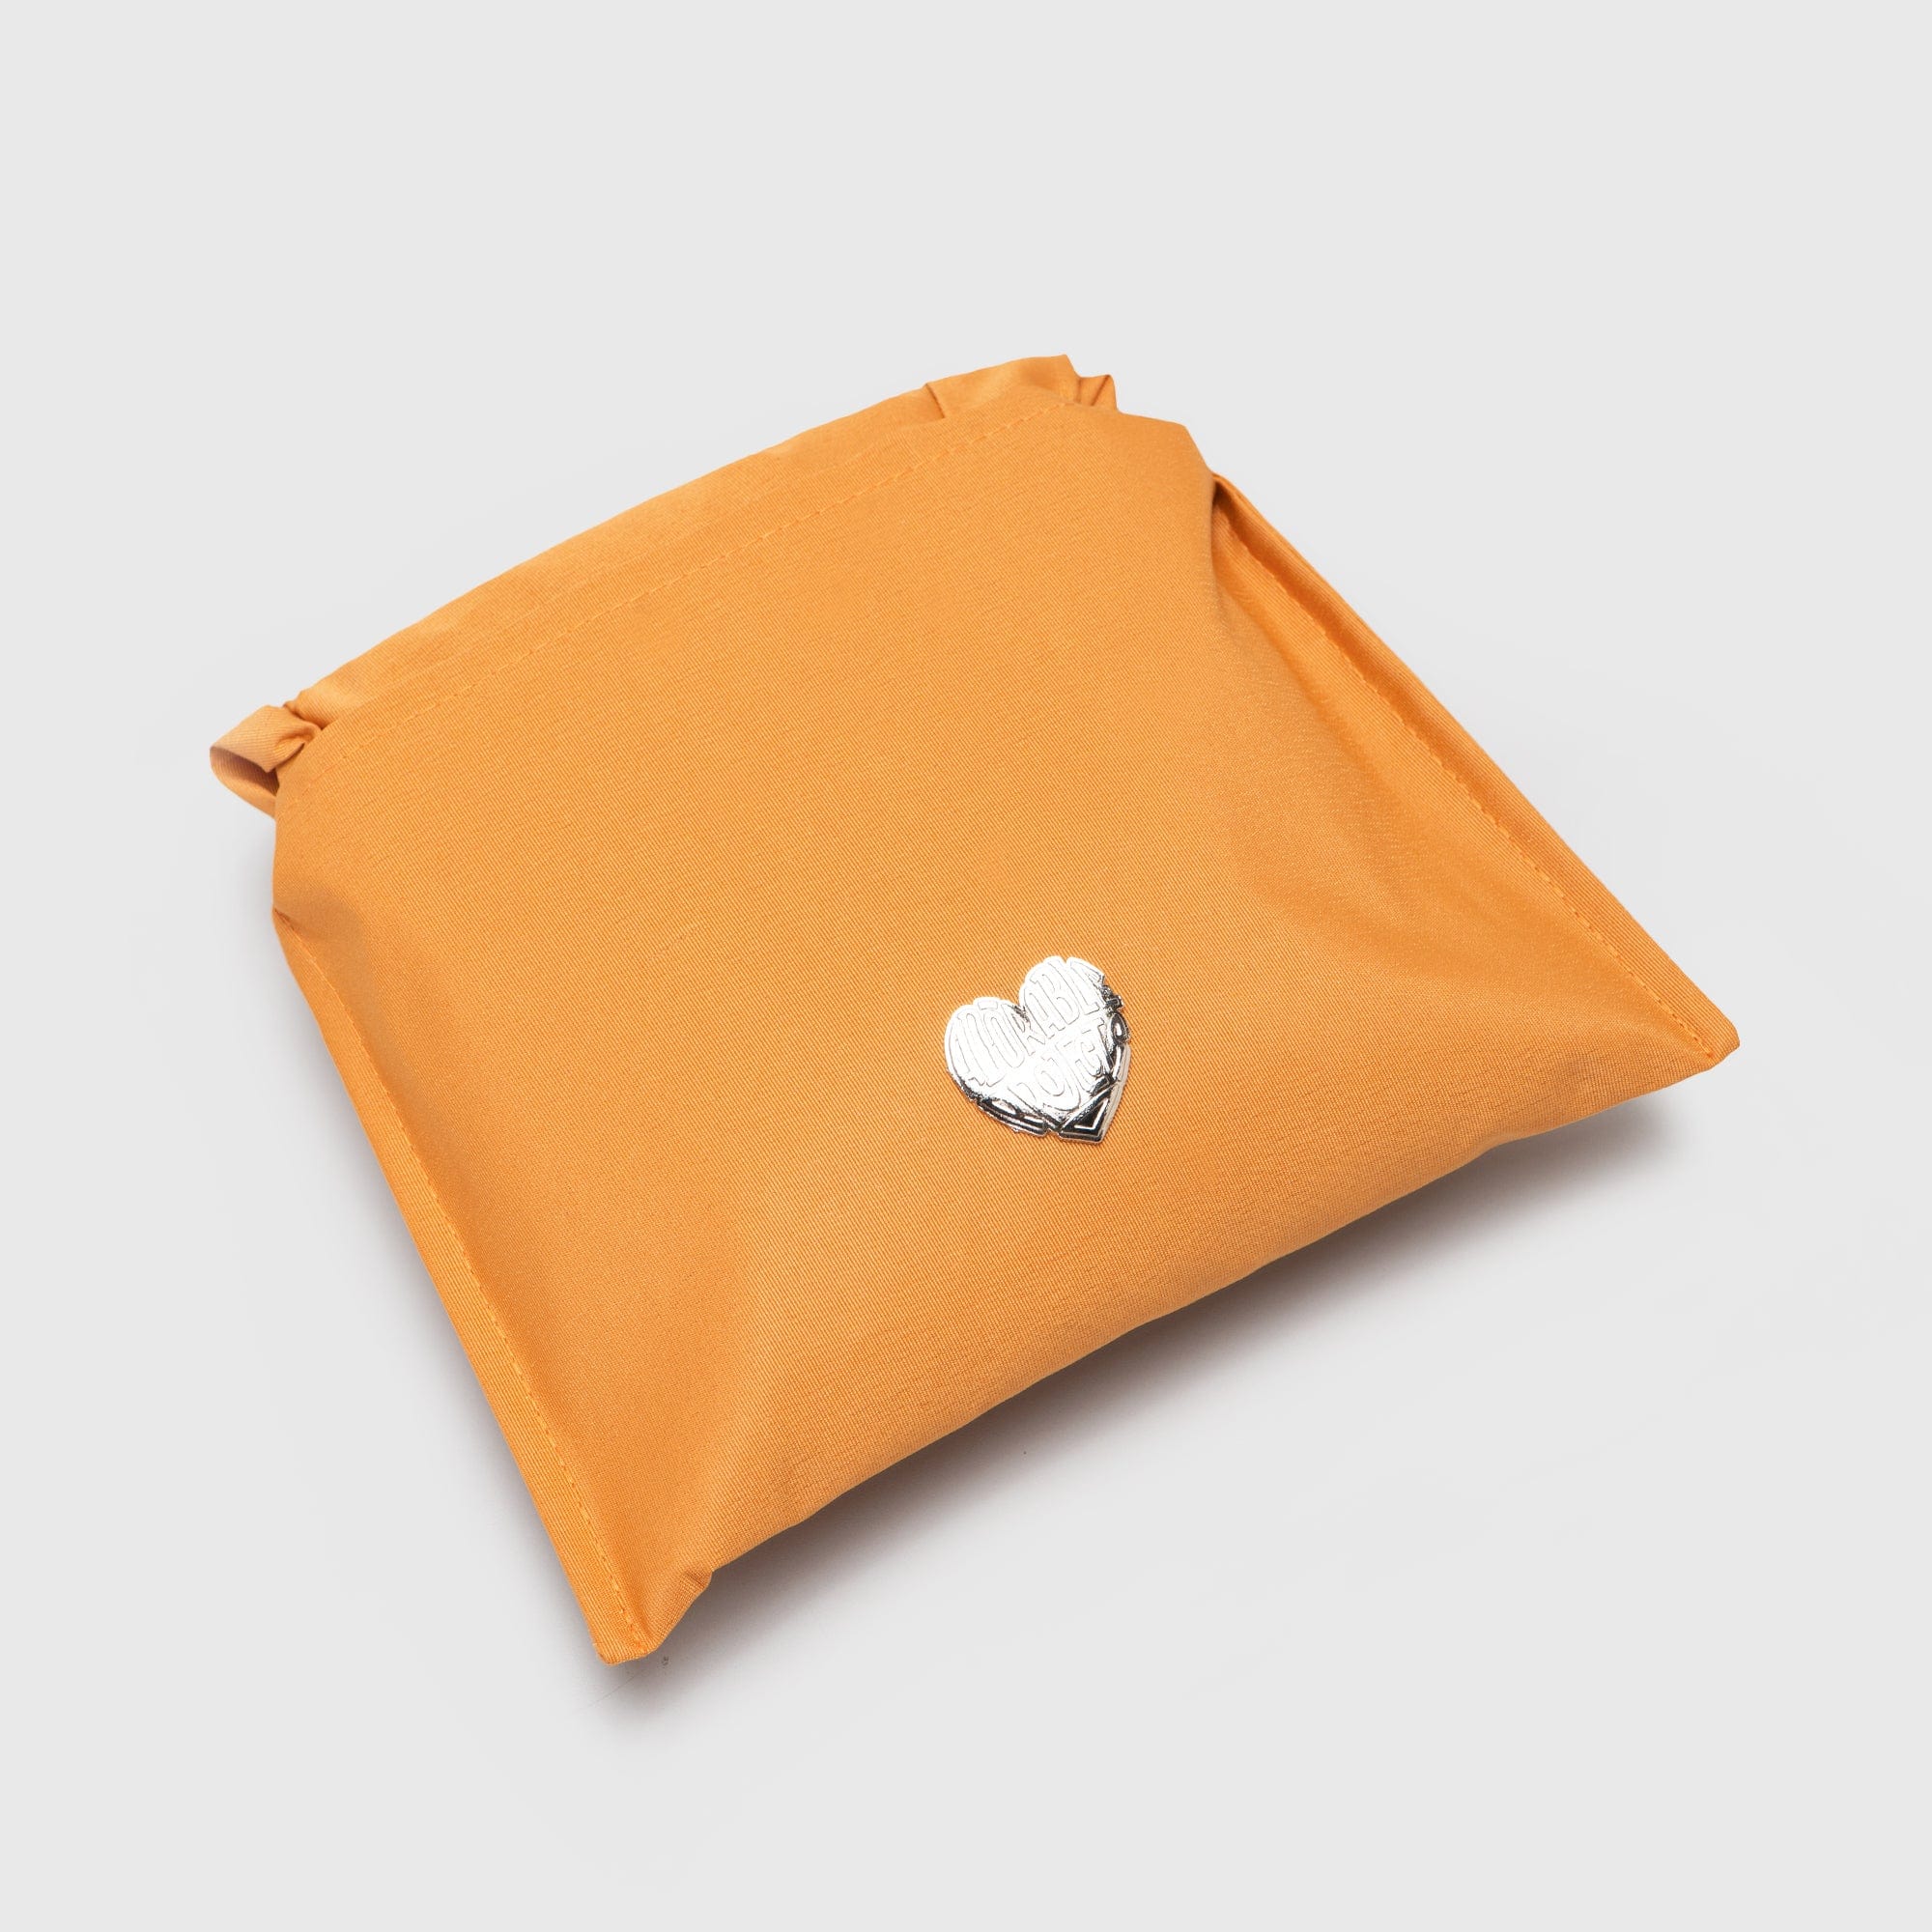 Adorable Projects Official Adorableprojects - Nade Bag Mustard - Dumpling Bag